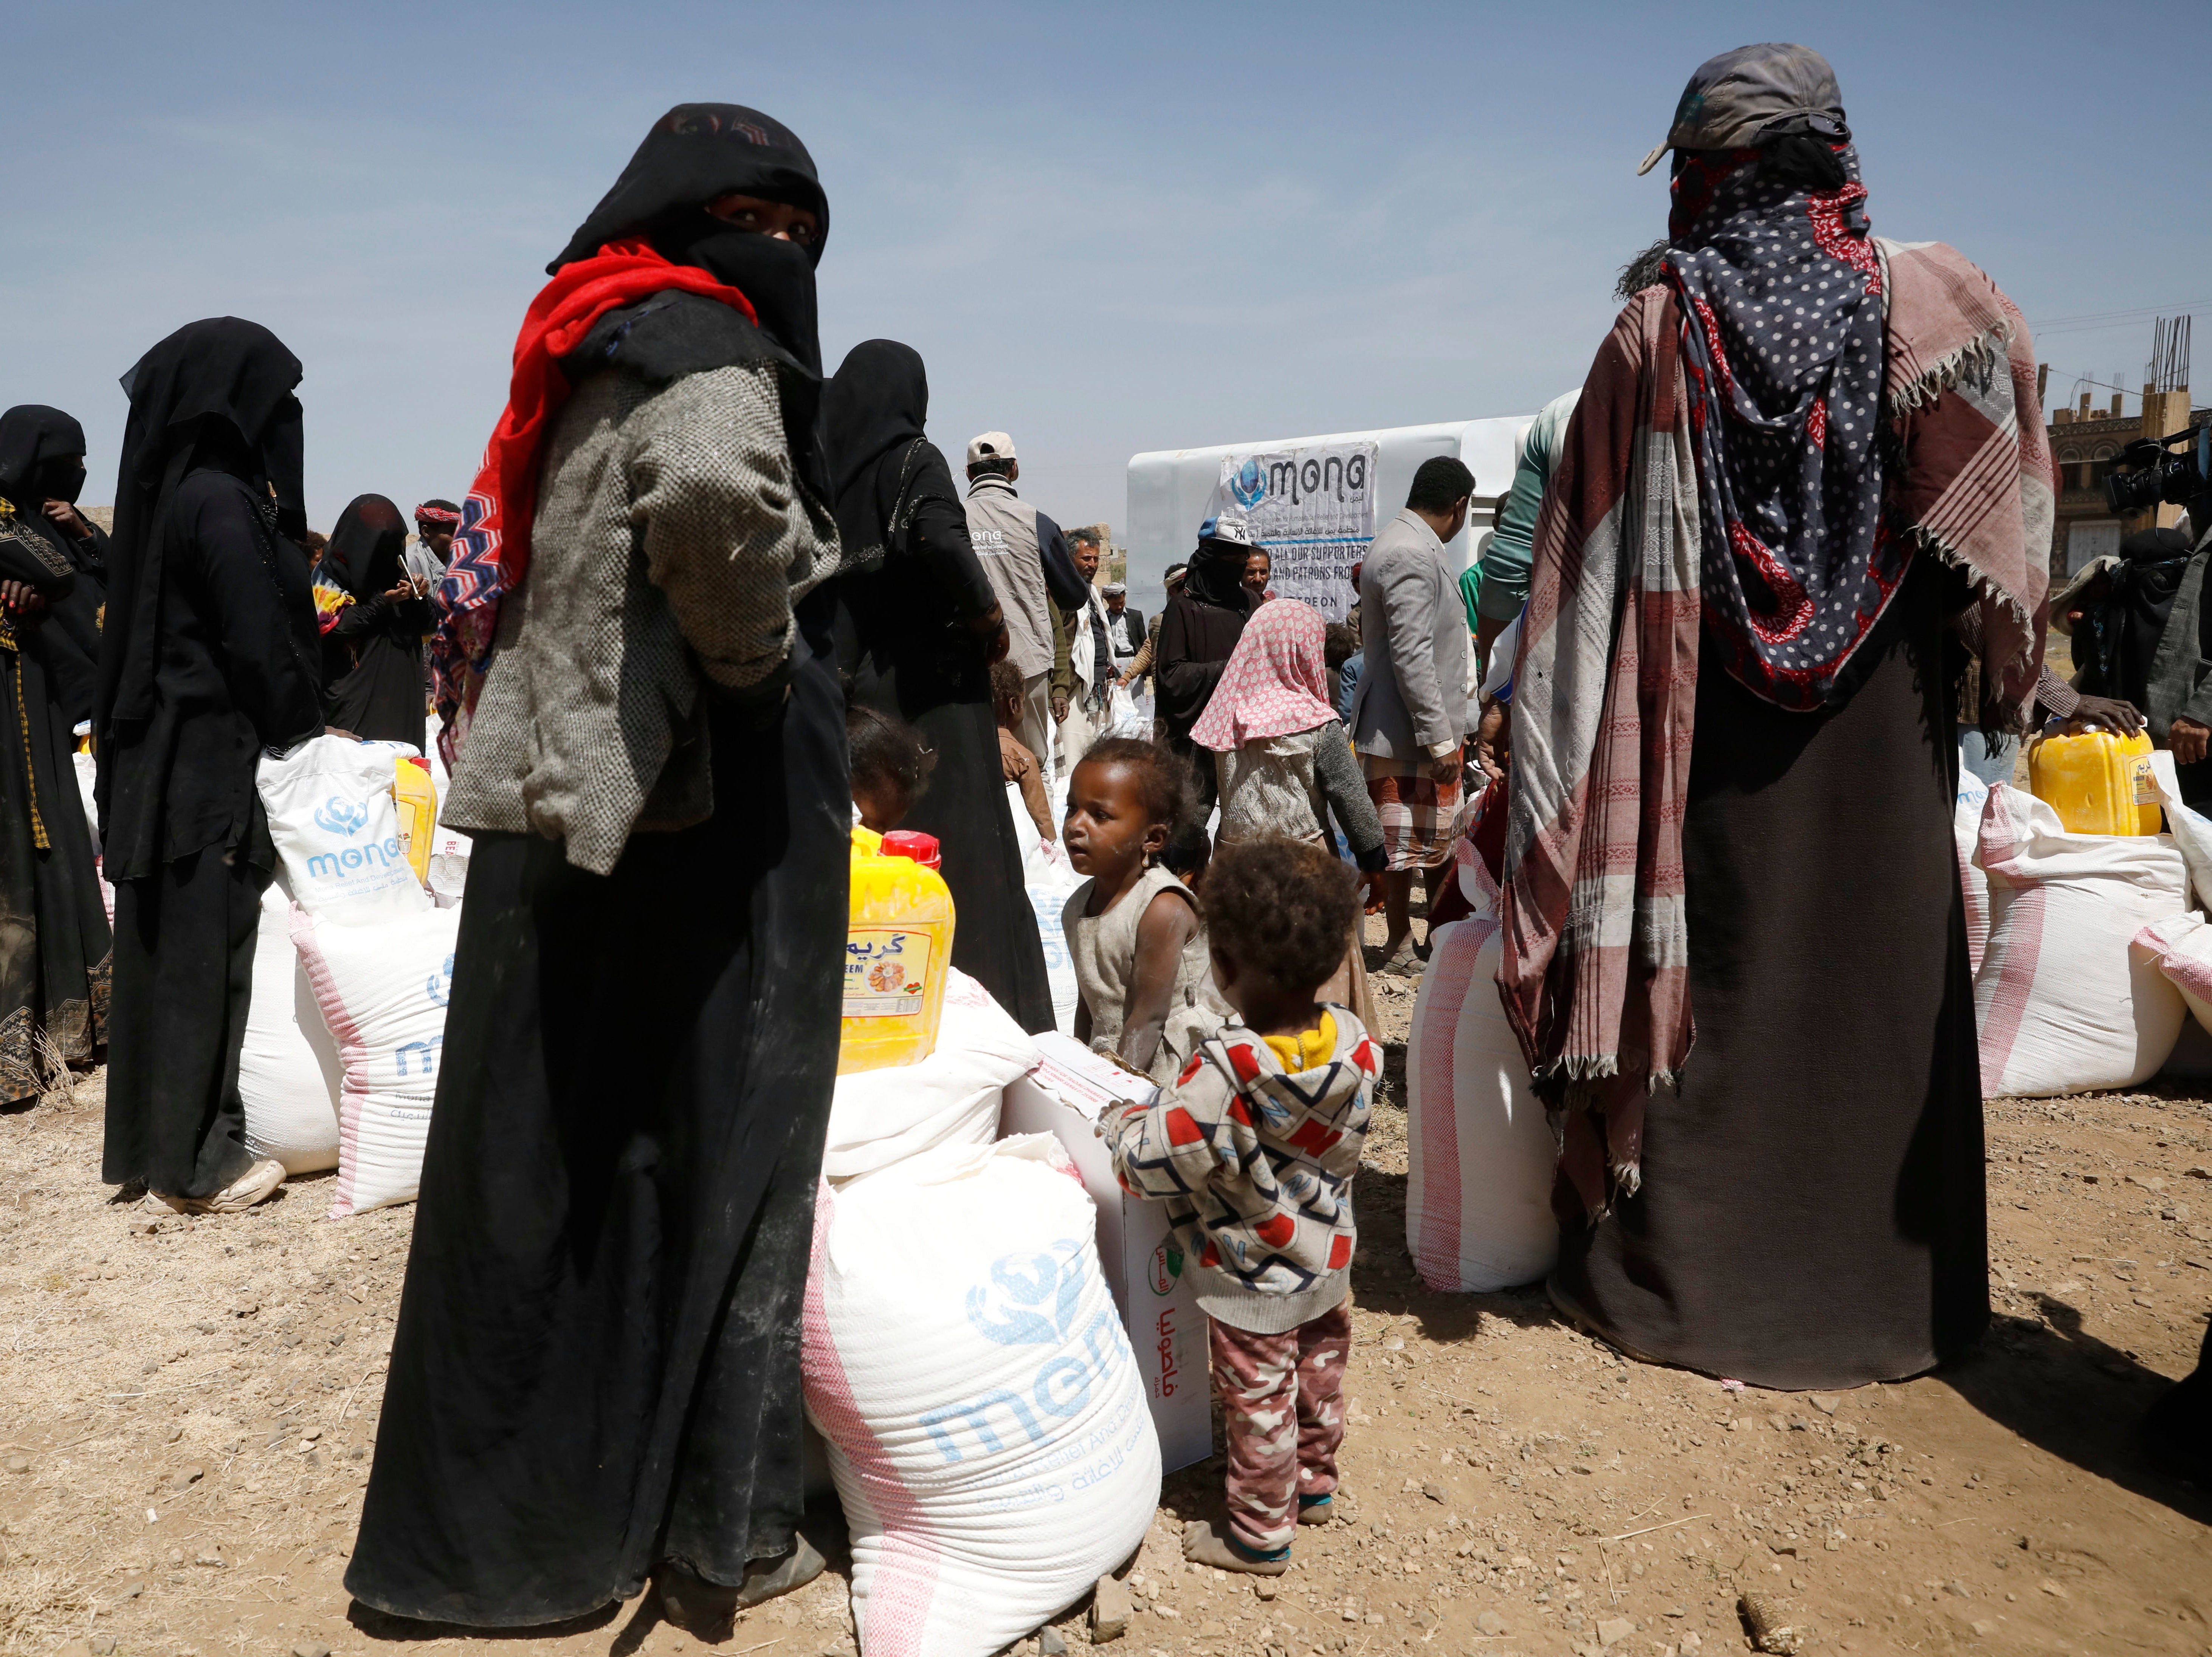 Yemenis are given food rations by the Mona Relief charity at a displaced persons camp in Sanaa